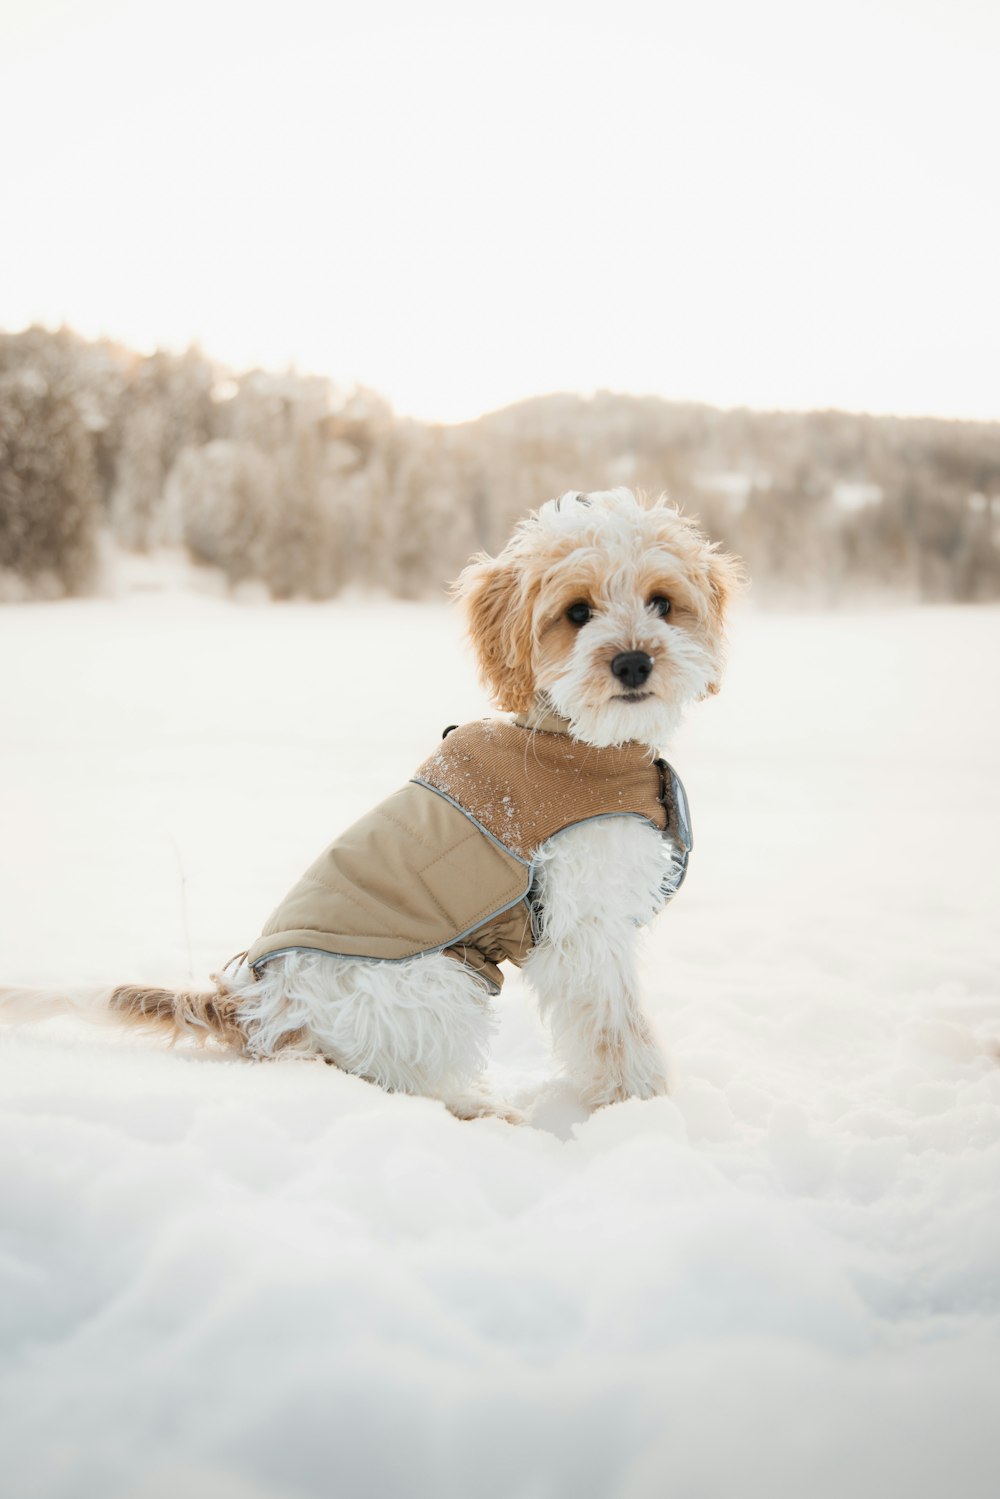 a small dog wearing a coat in the snow